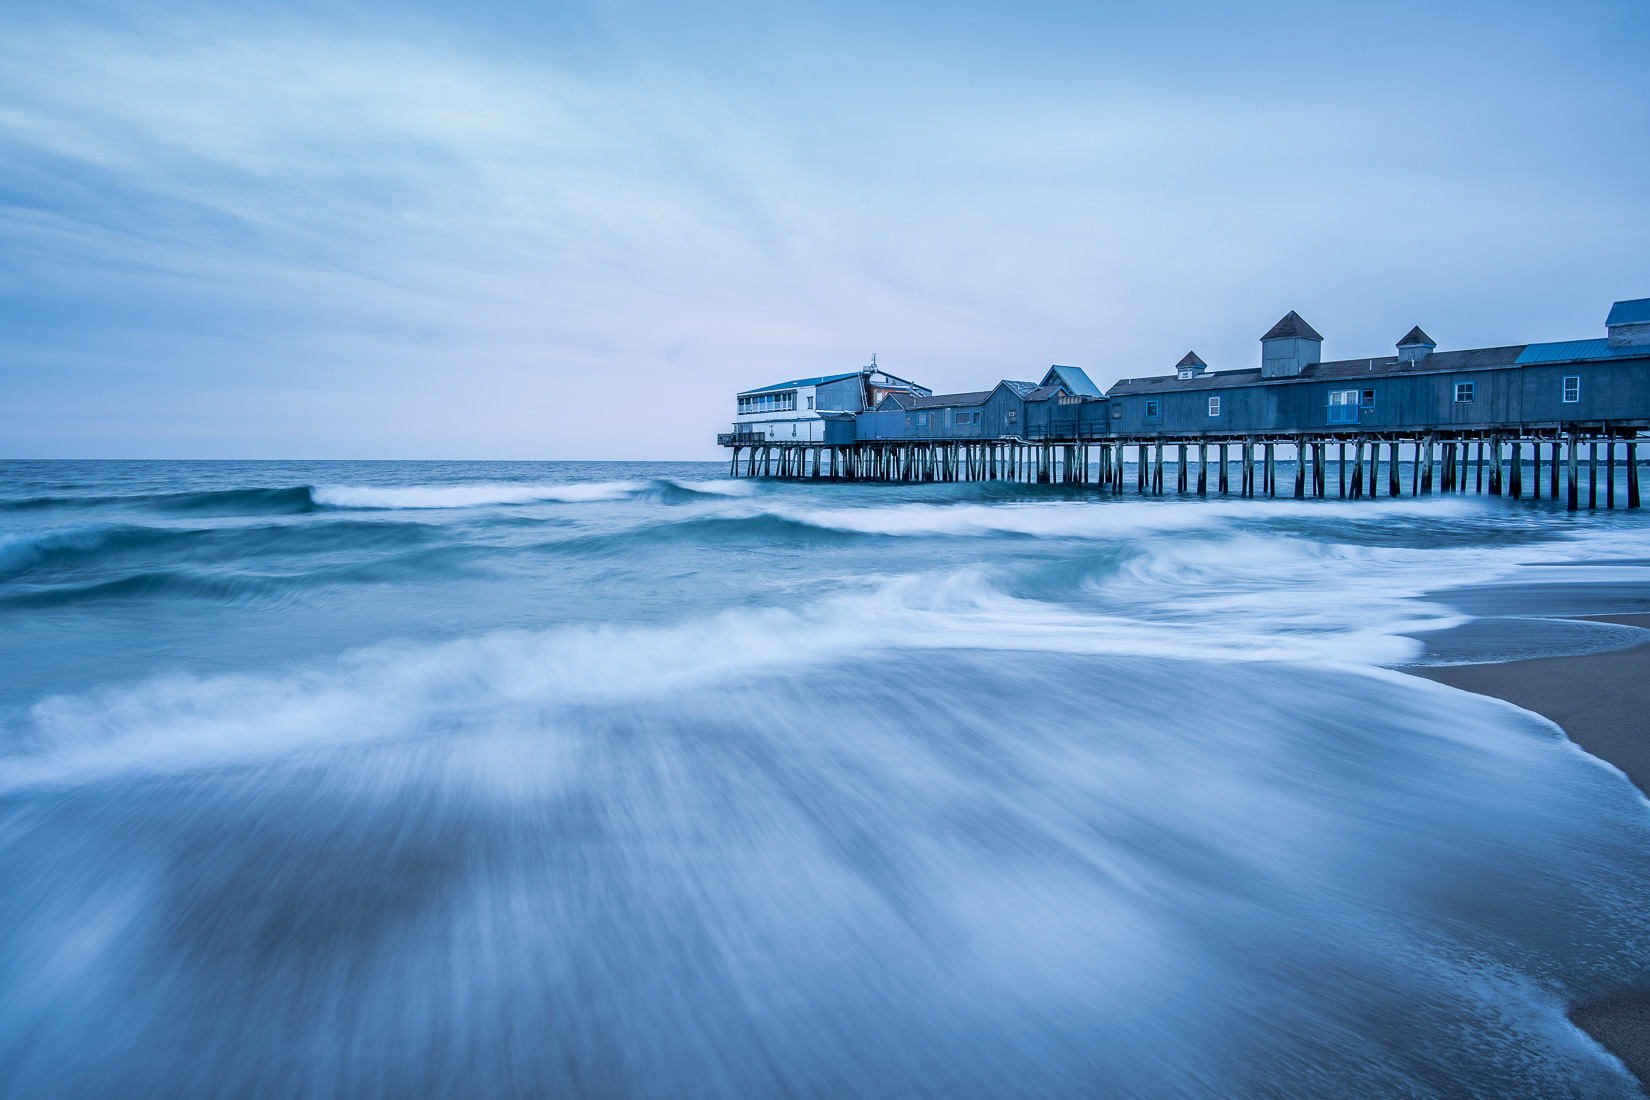 The Pier at Old Orchard Beach during Blue Hour, Maine